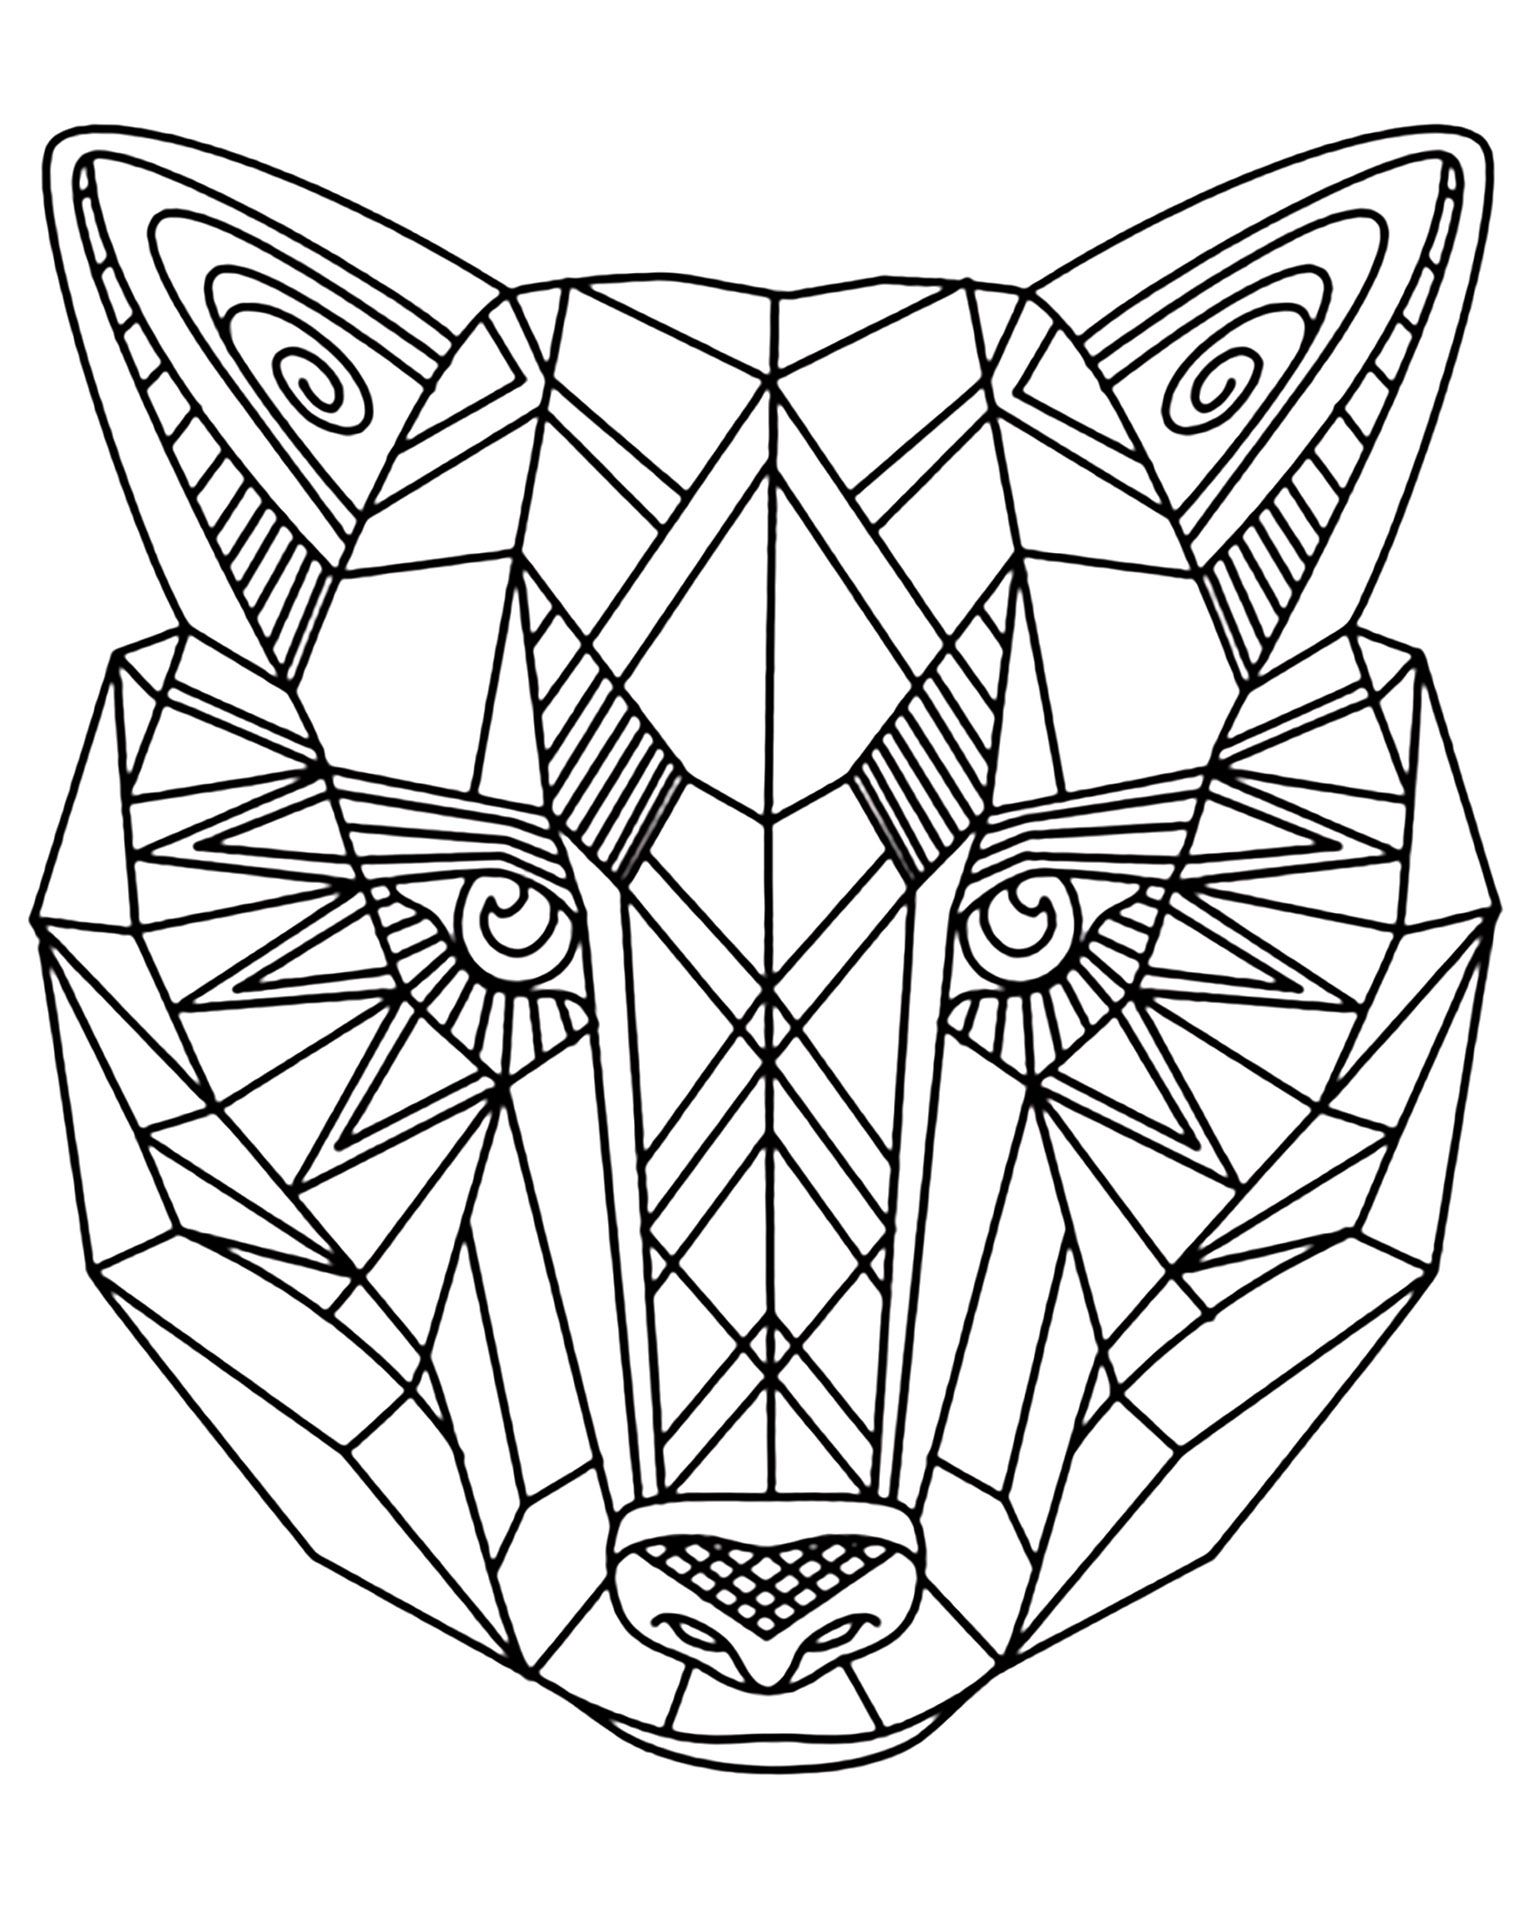 Geometric wolf headfrom the gallery animals geometric coloring pages geometric wolf pattern coloring pages